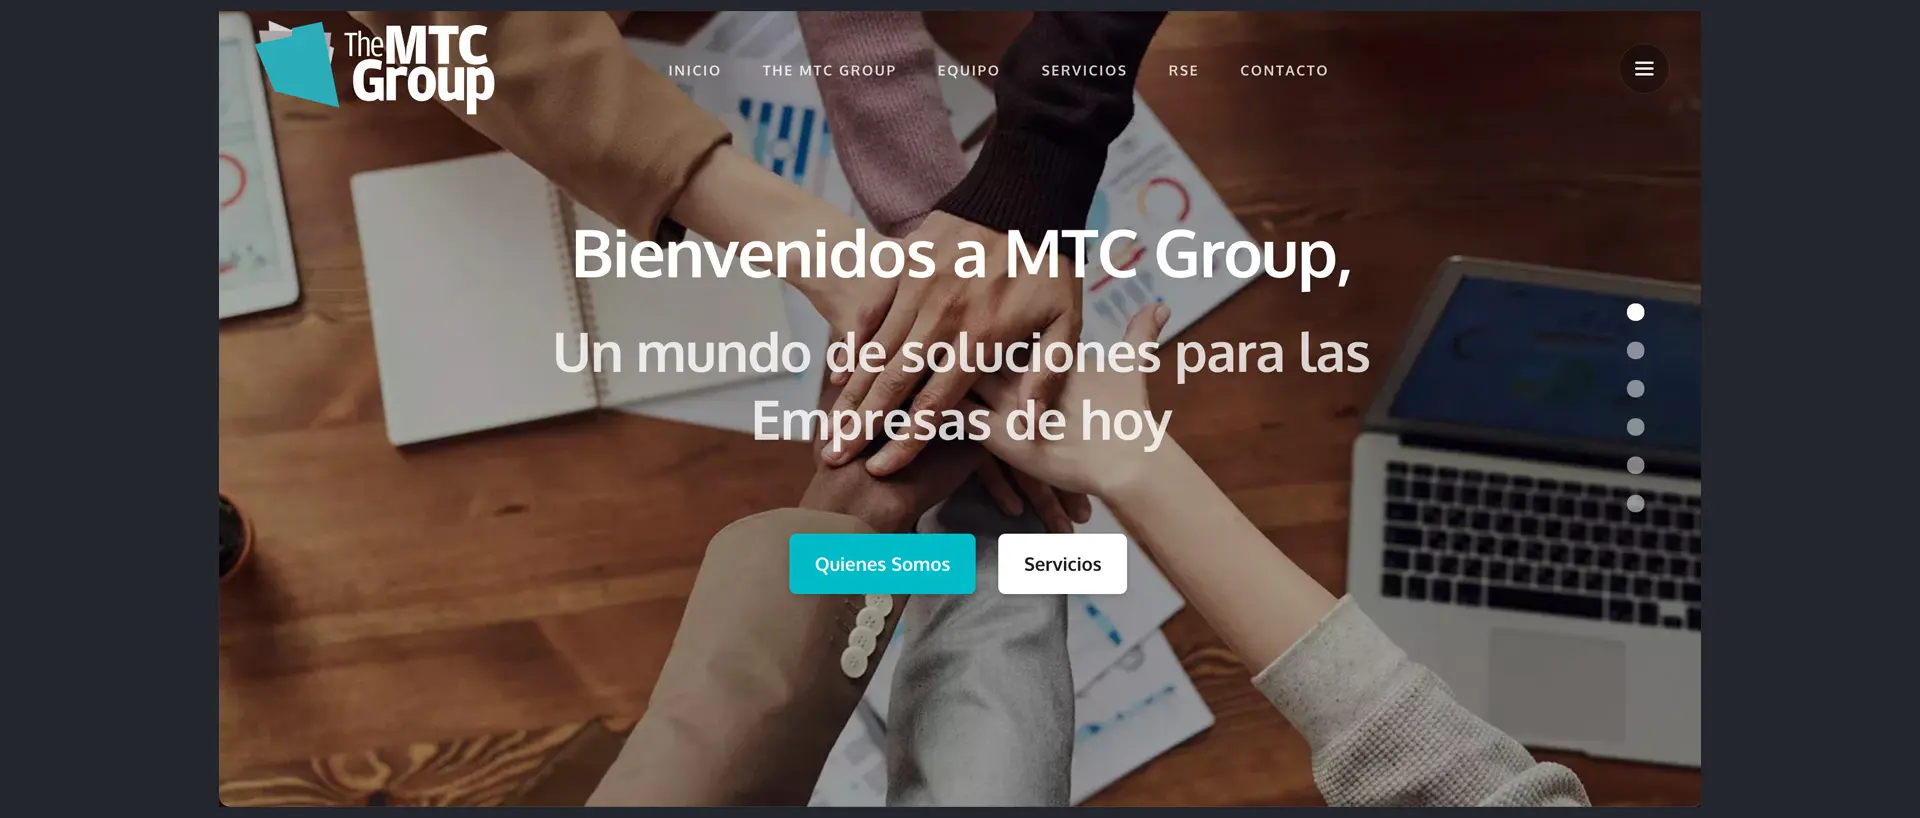 The MTC Group